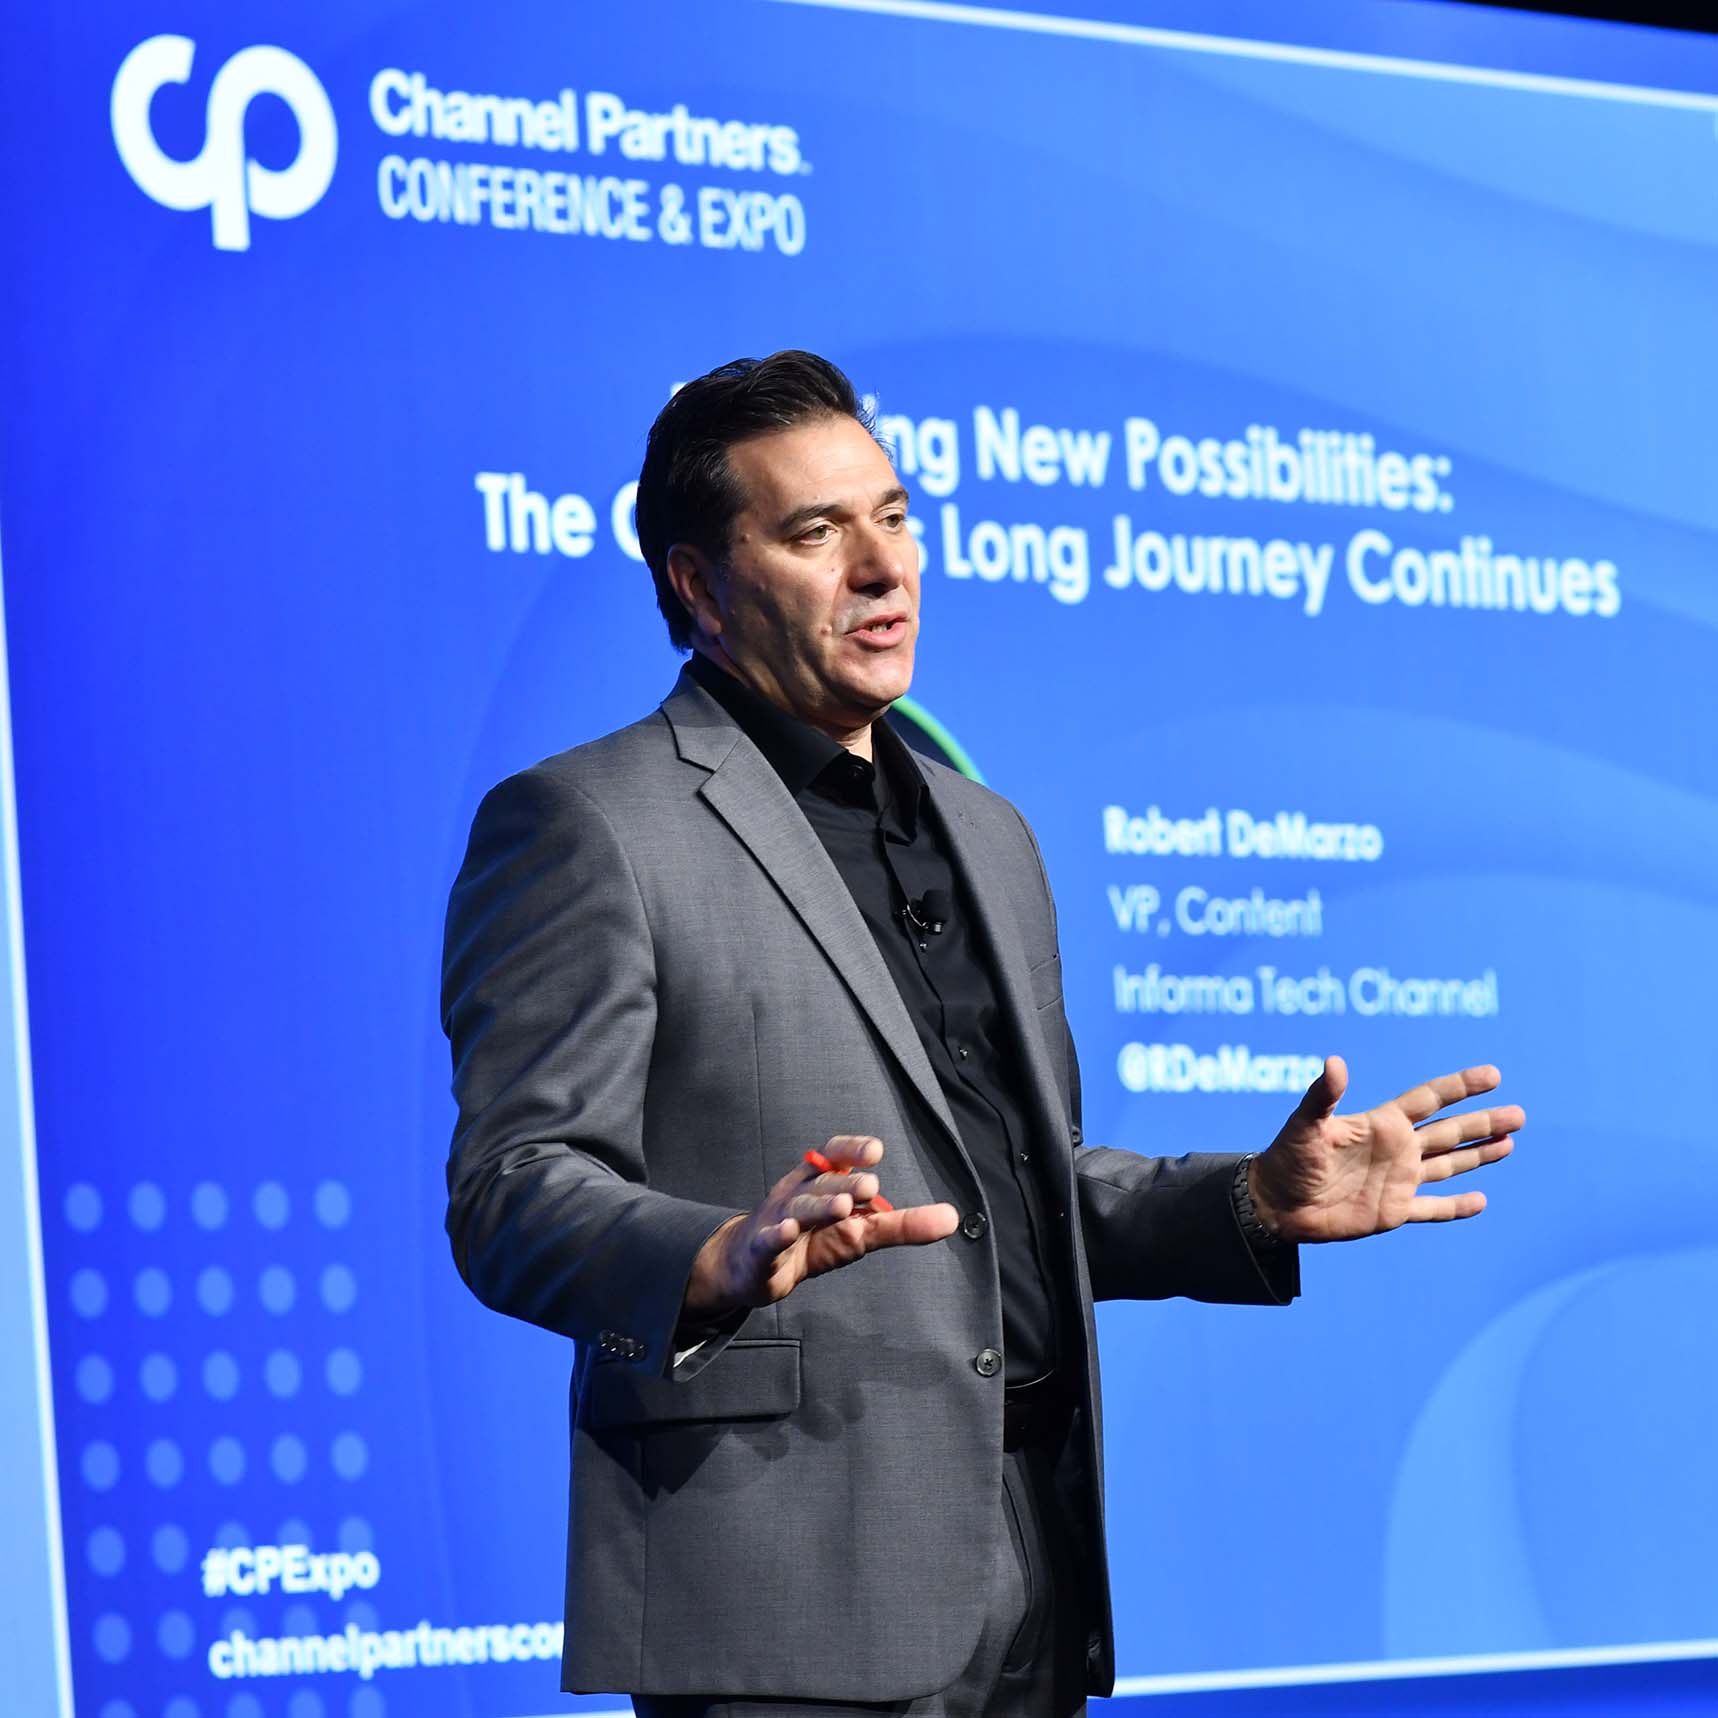 Bobby DeMarzo Onstage at Channel Partners Conference & Expo